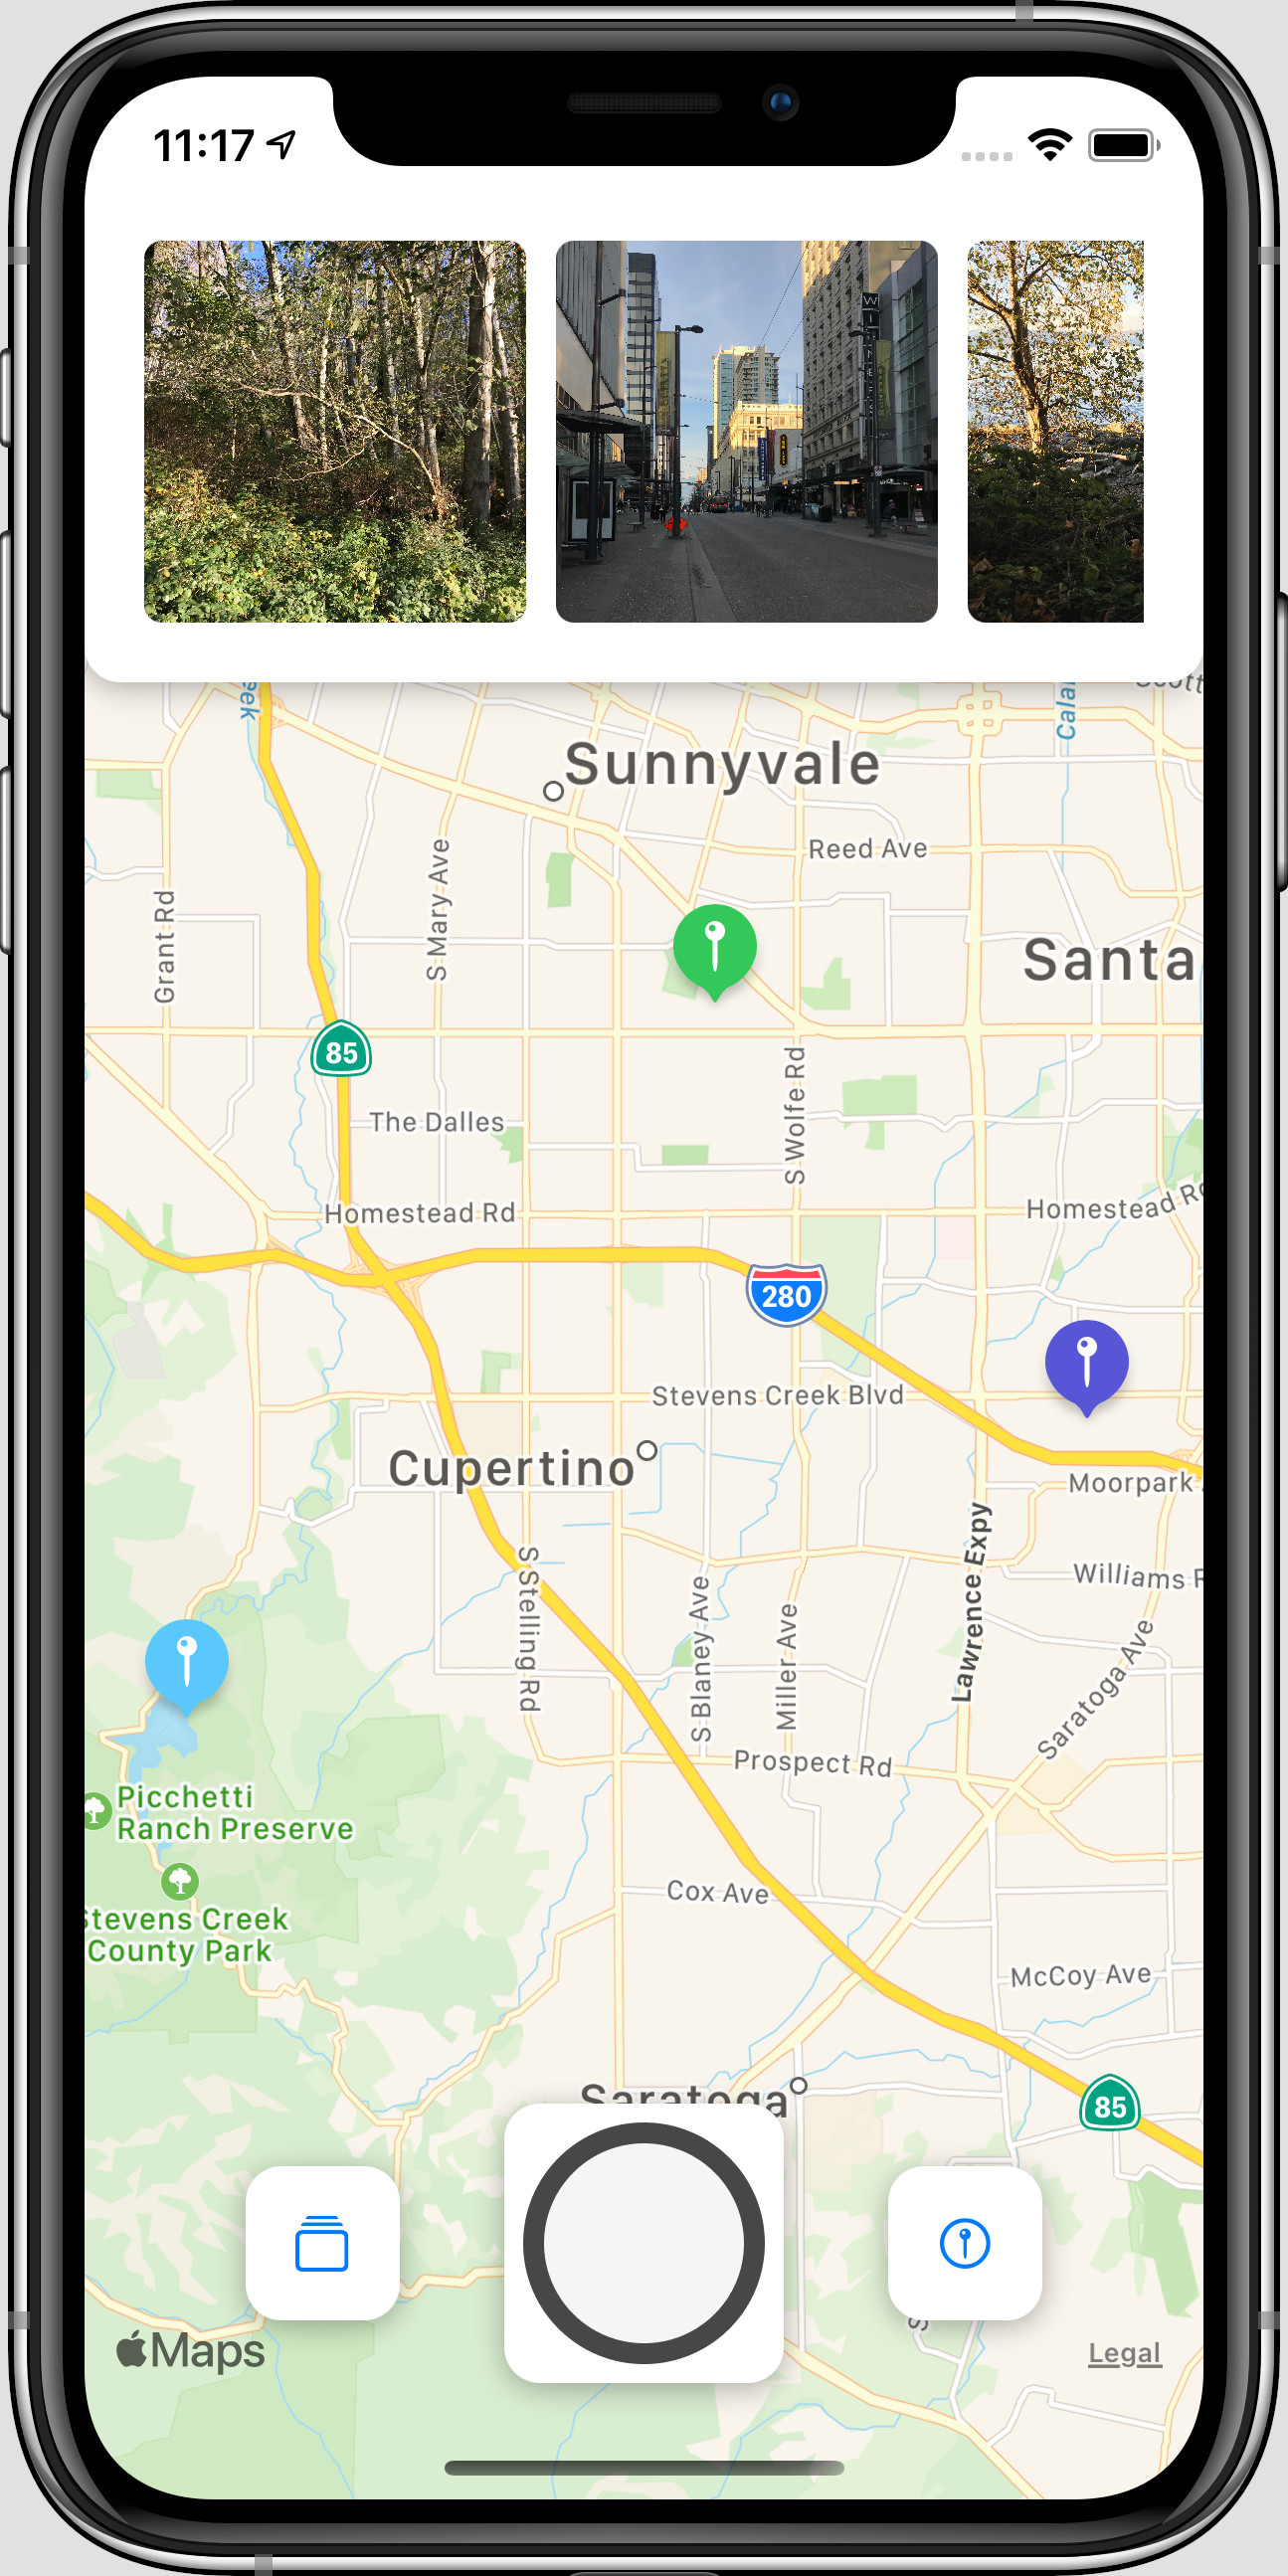 Home screen of the app Location Camera displayed on an iPhone